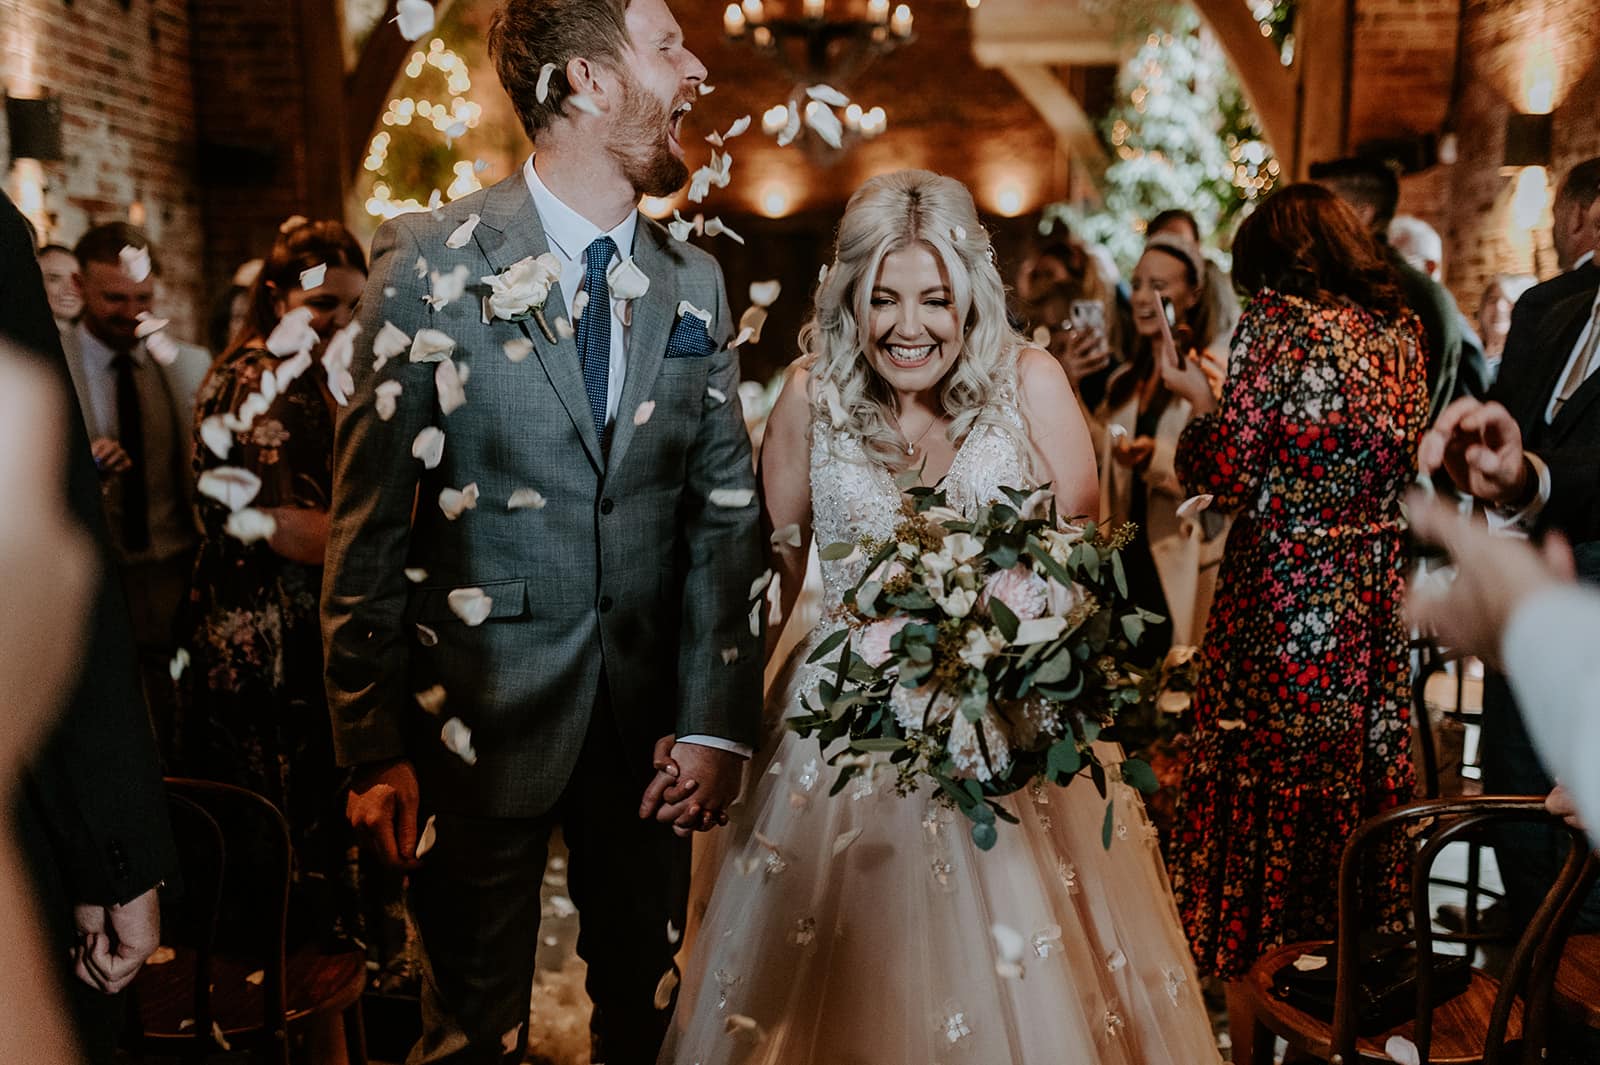 Bride and groom with wedding confetti